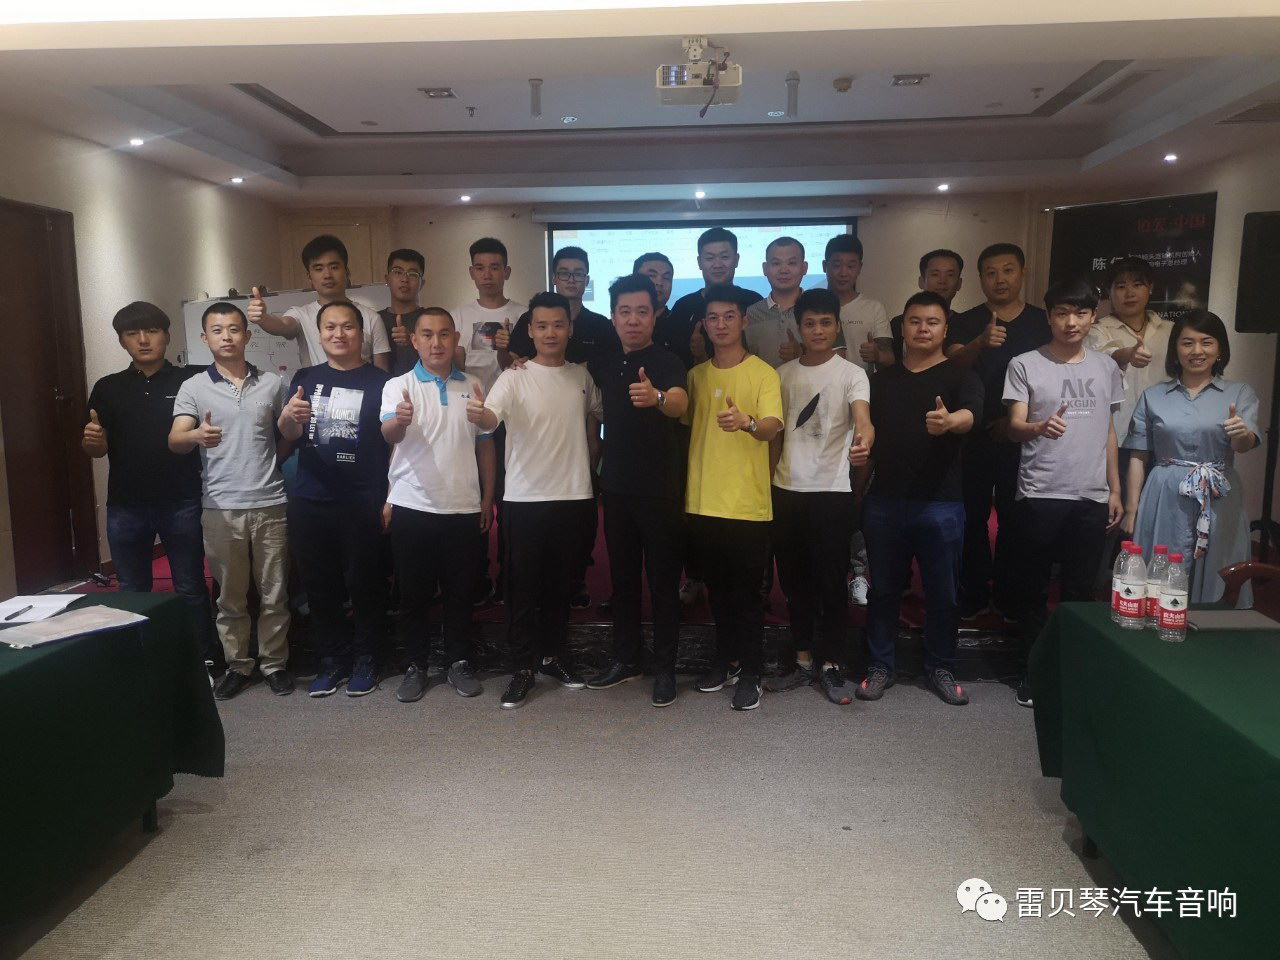 Baifu Chen is now going to Shandong to carry out regional operator training